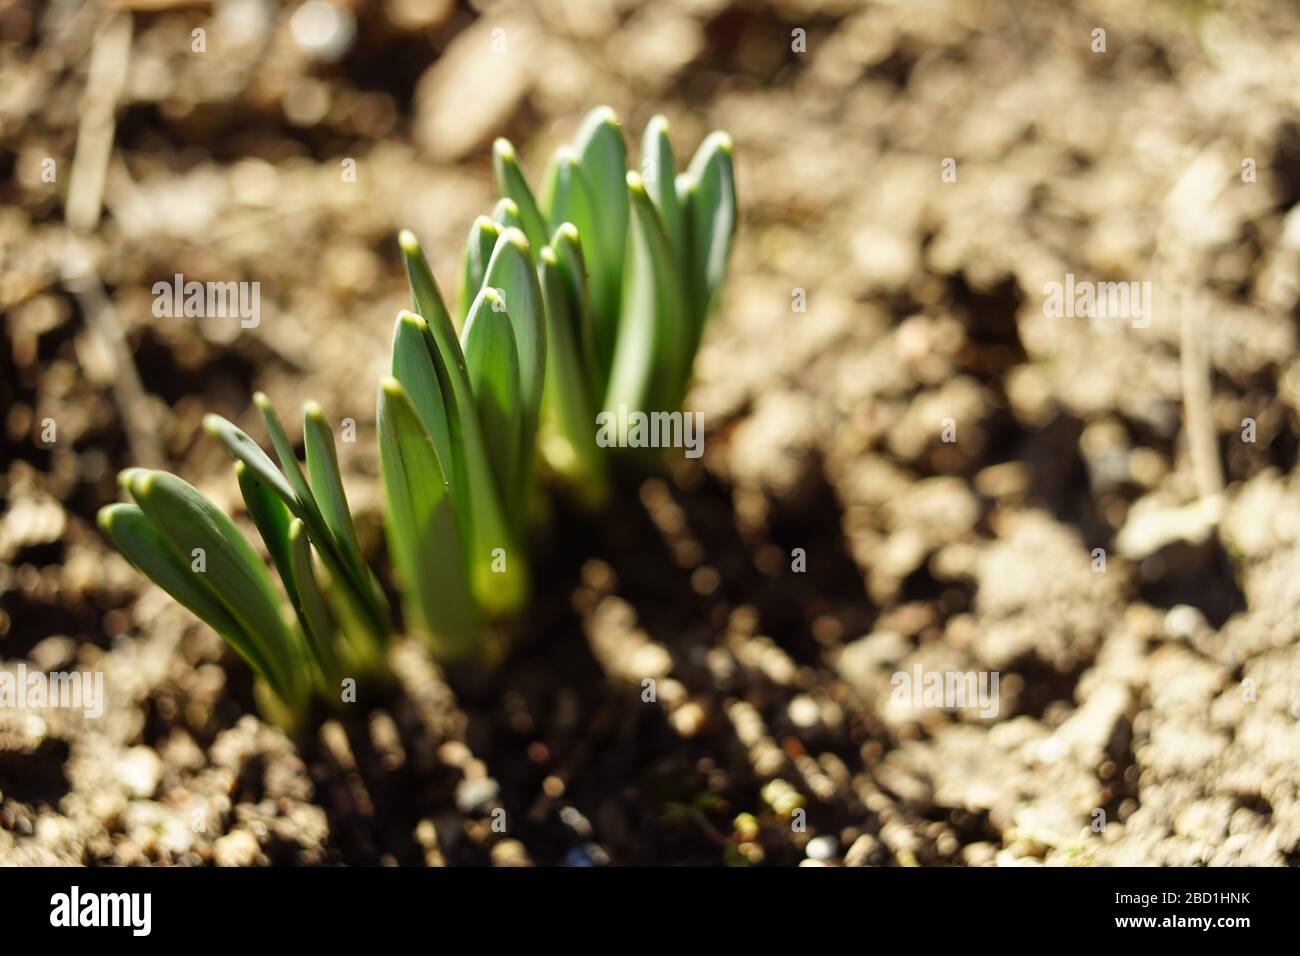 Fresh green sprouts of daffodils flowers grow in the garden ground in spring Stock Photo